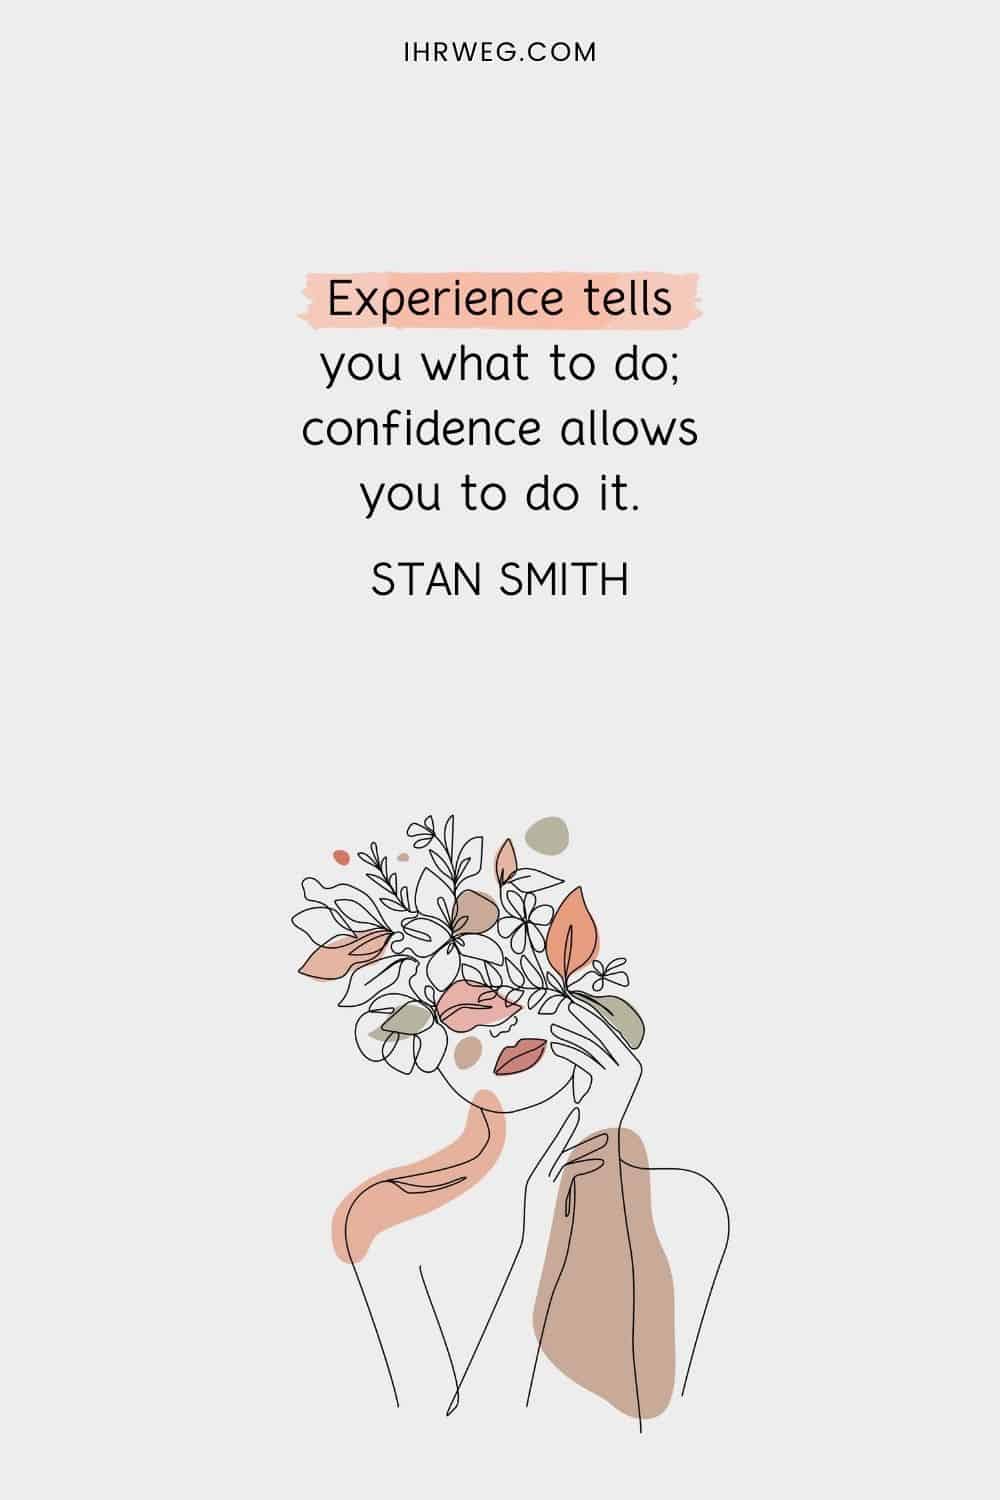 Experience tells you what to do; confidence allows you to do it